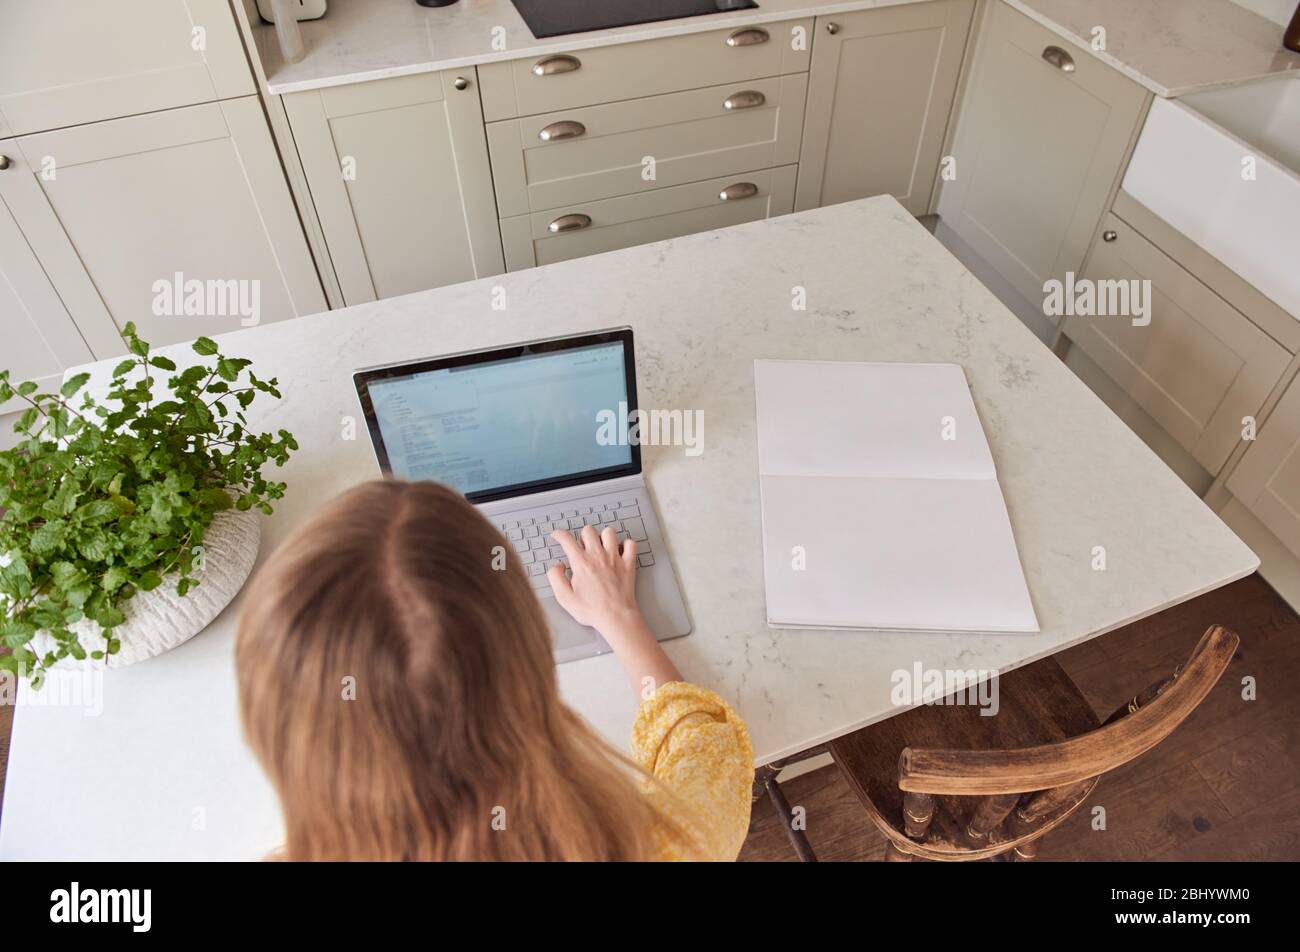 Young girl using laptop in kitchen. Stock Photo